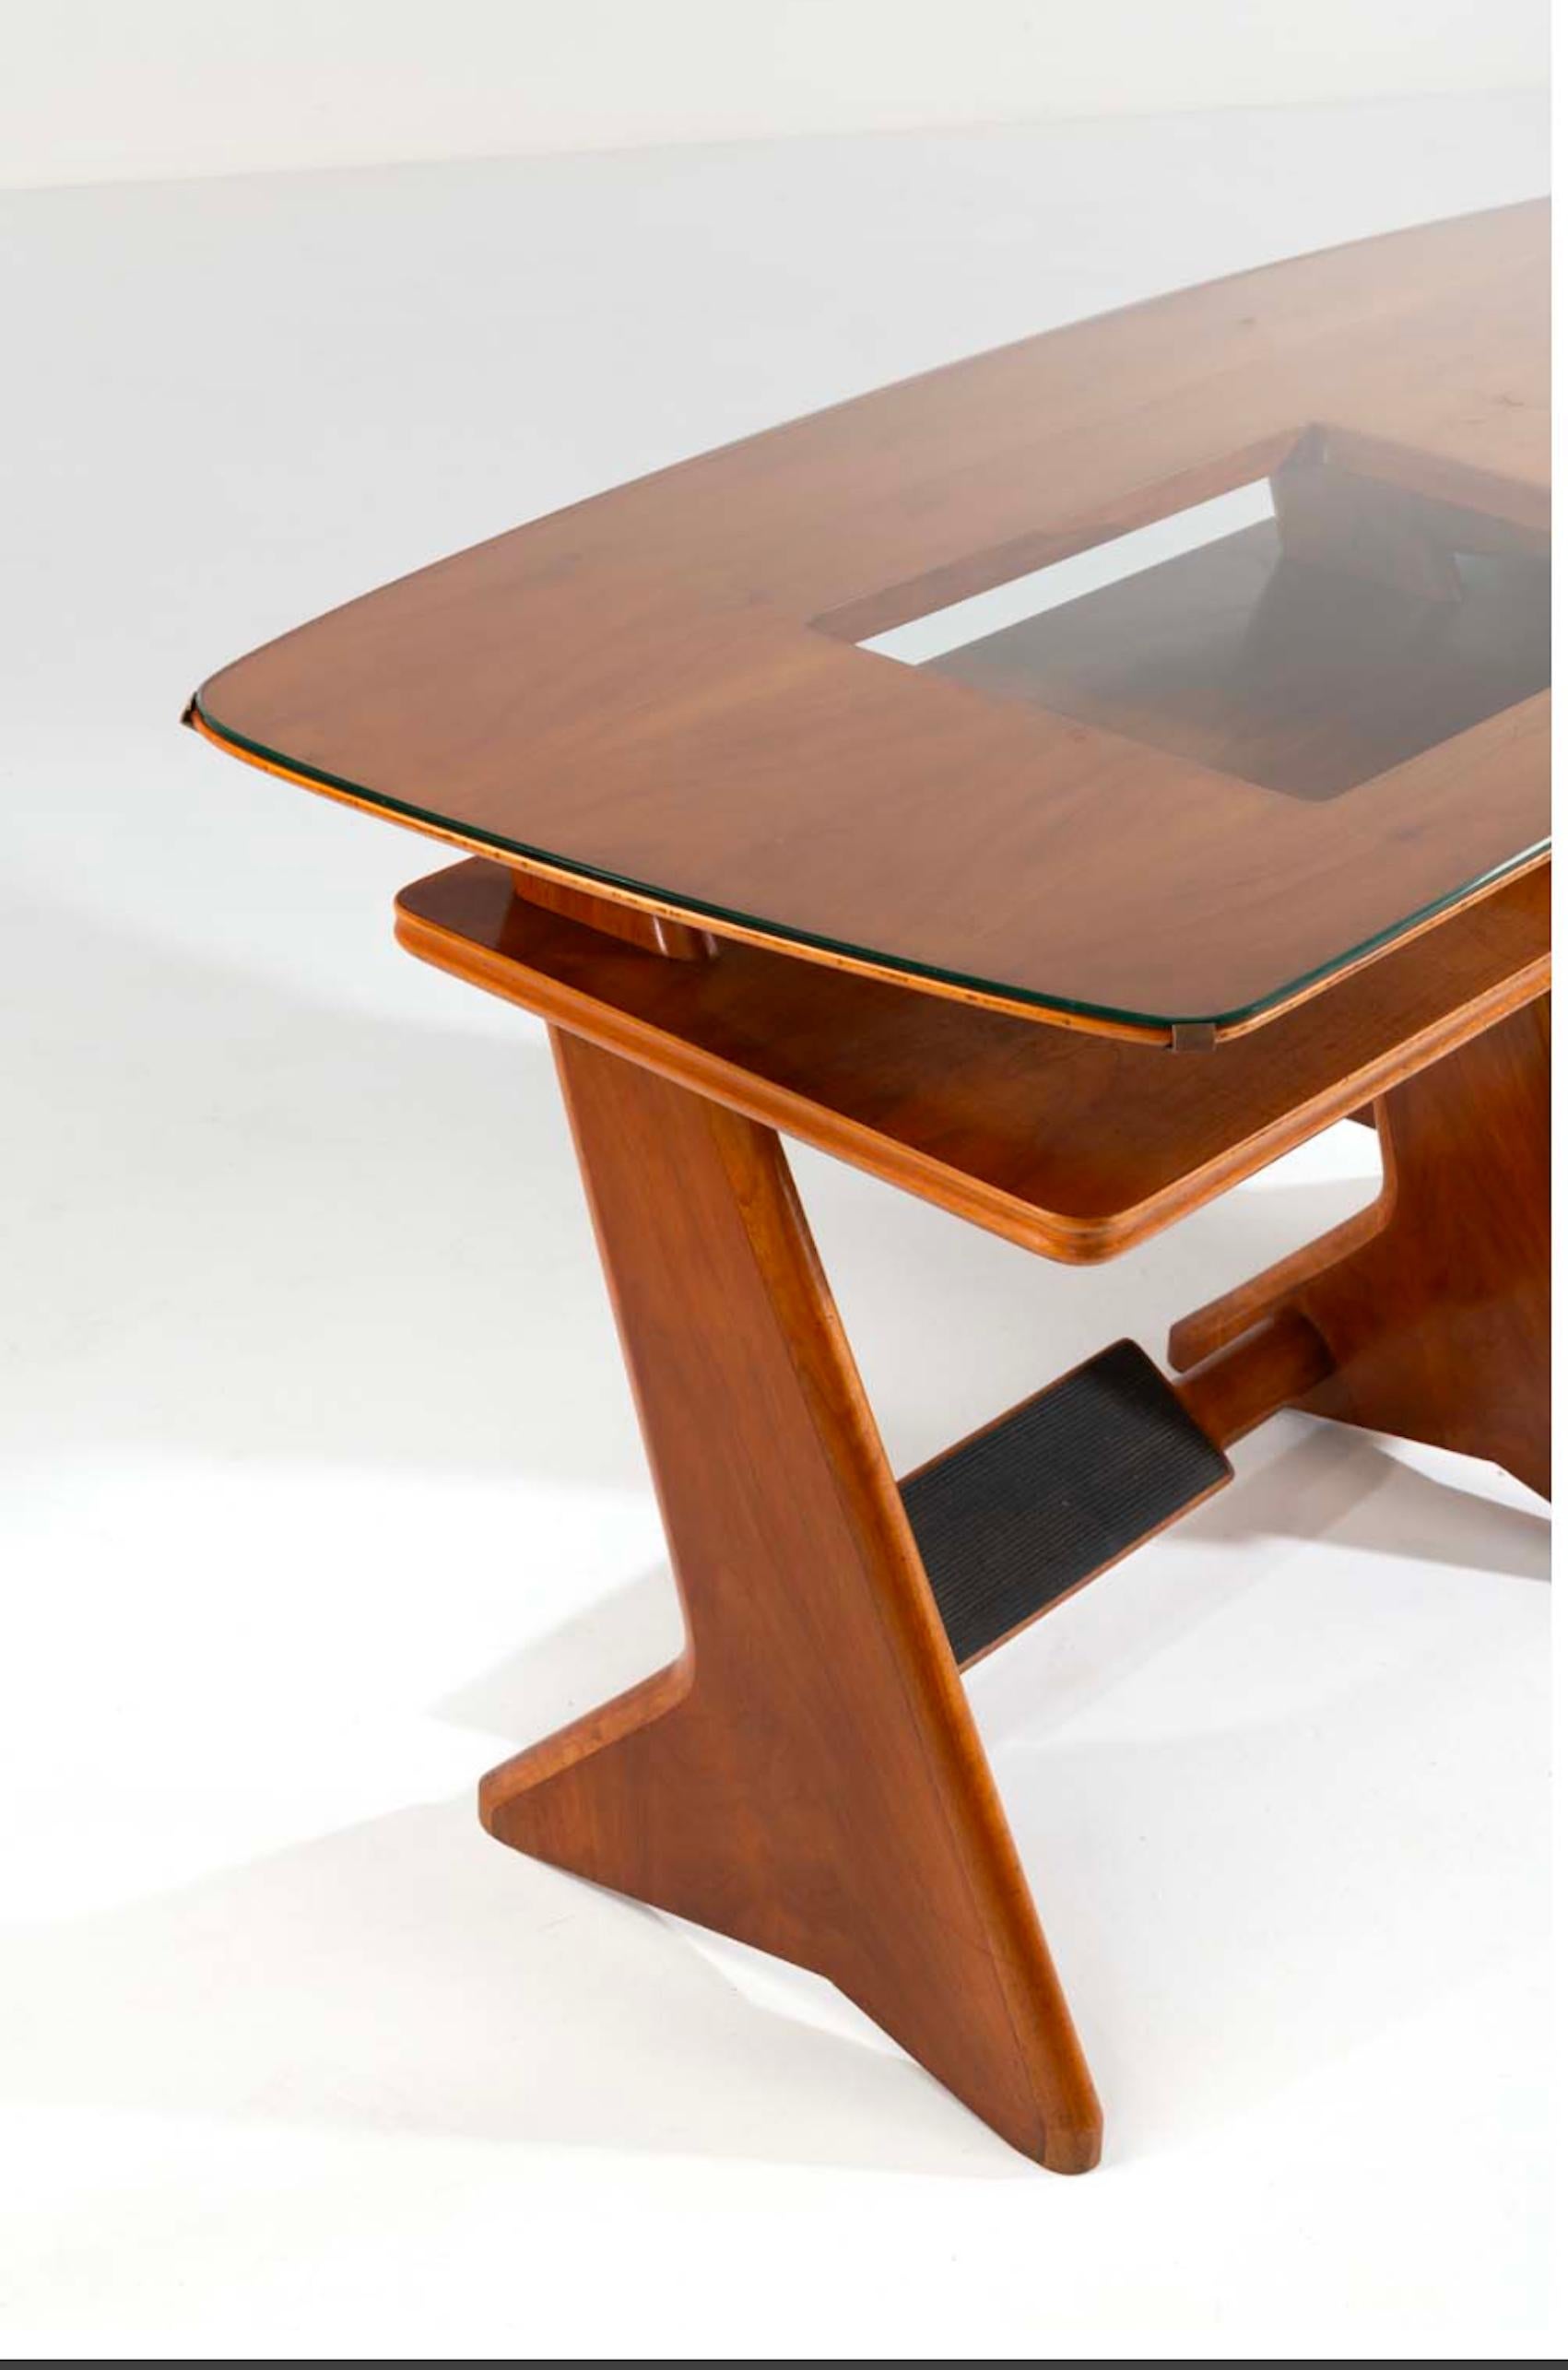 Mid-Century Modern Important Desk in wood and glass by Melchiorre Bega (Attr.), Italy, 1950s For Sale